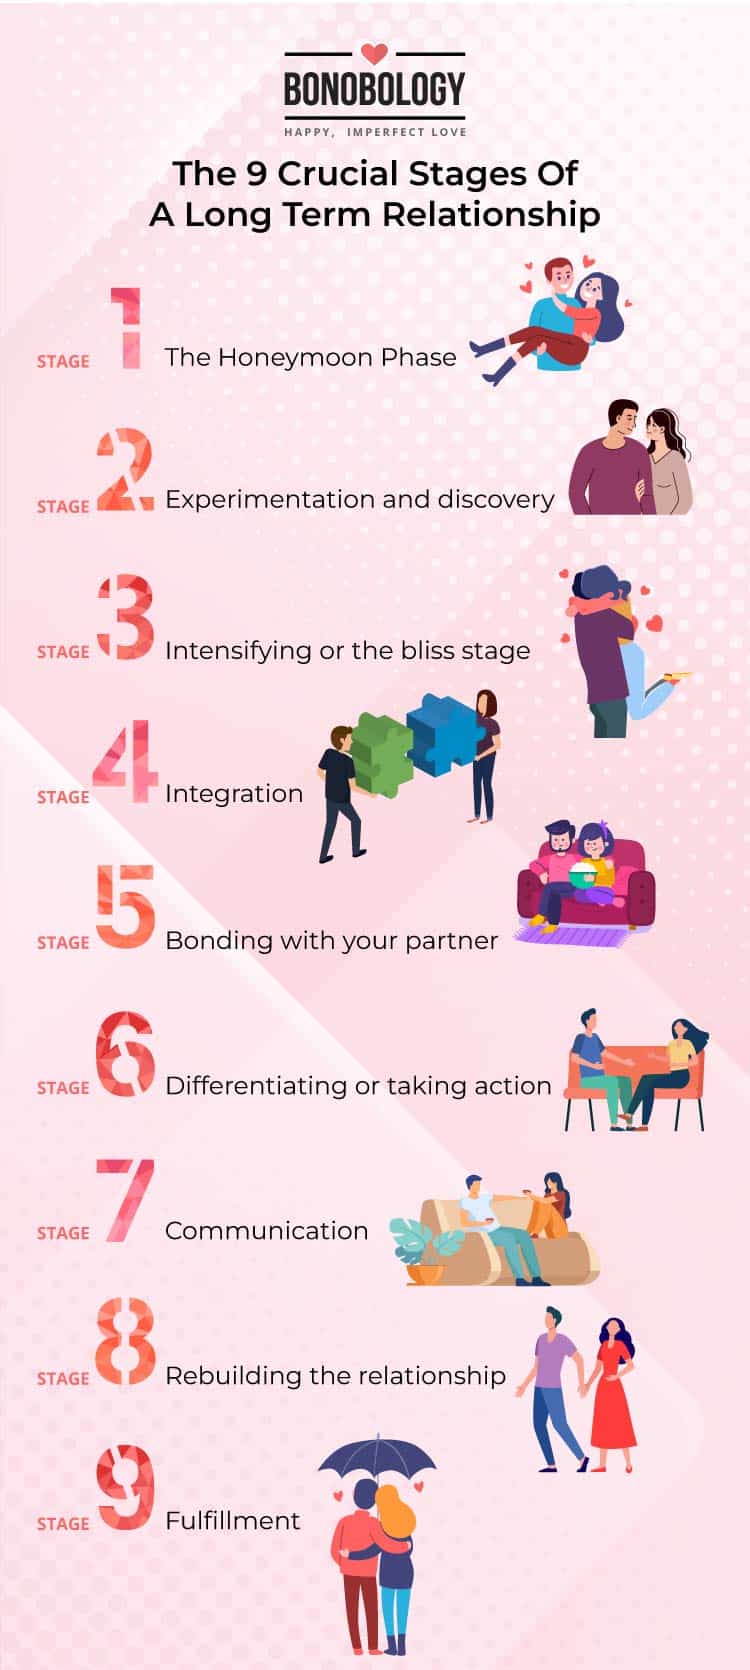 The 9 Crucial Stages Of A Long-Term Relationship